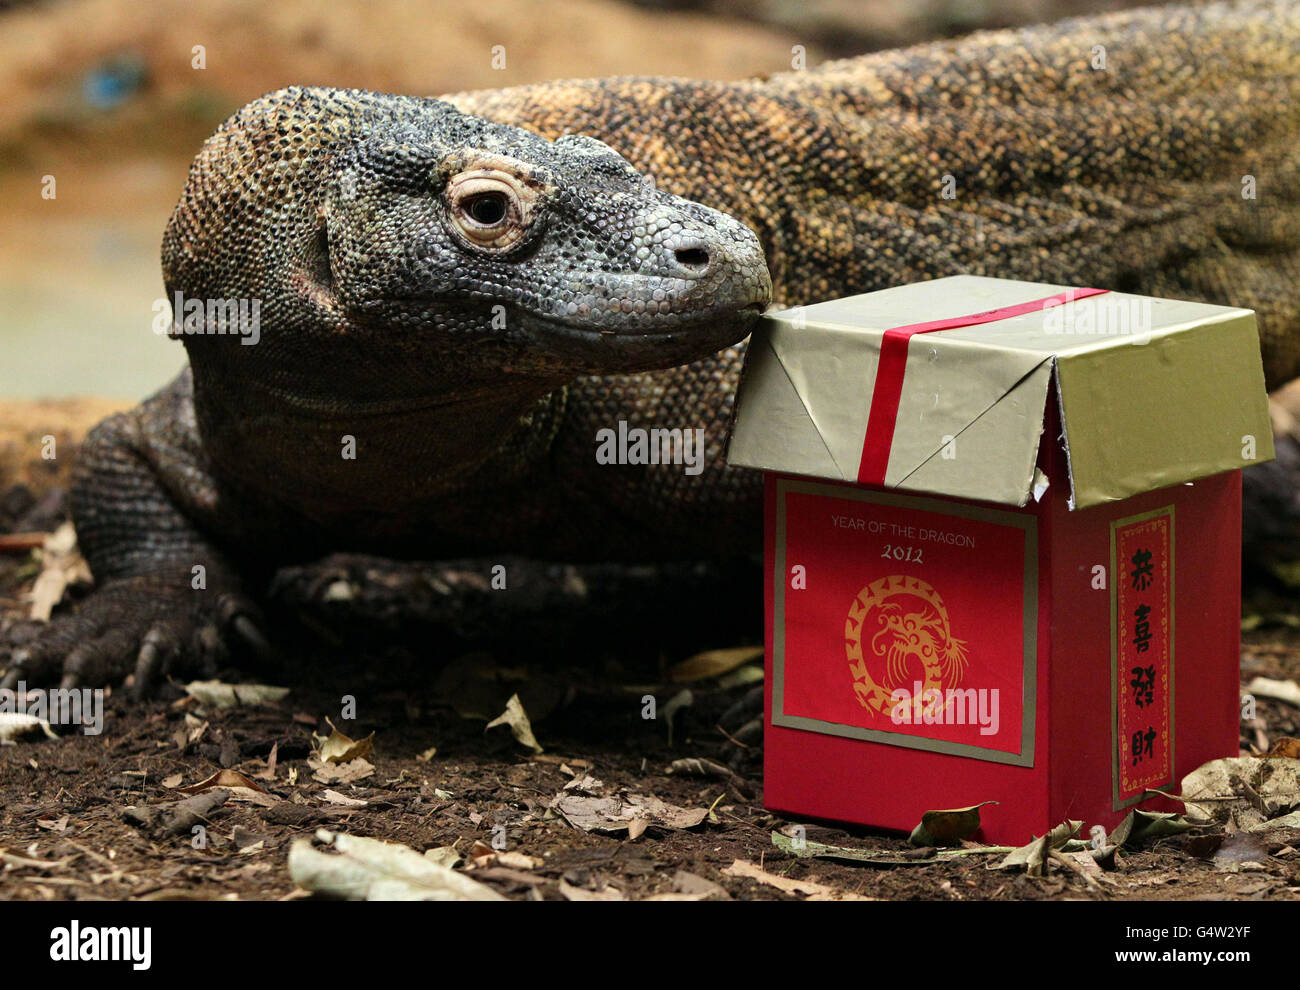 13-year old Raja the male Komodo dragon is given a treat to celebrate  Chinese New Year, at London Zoo in north London Stock Photo - Alamy